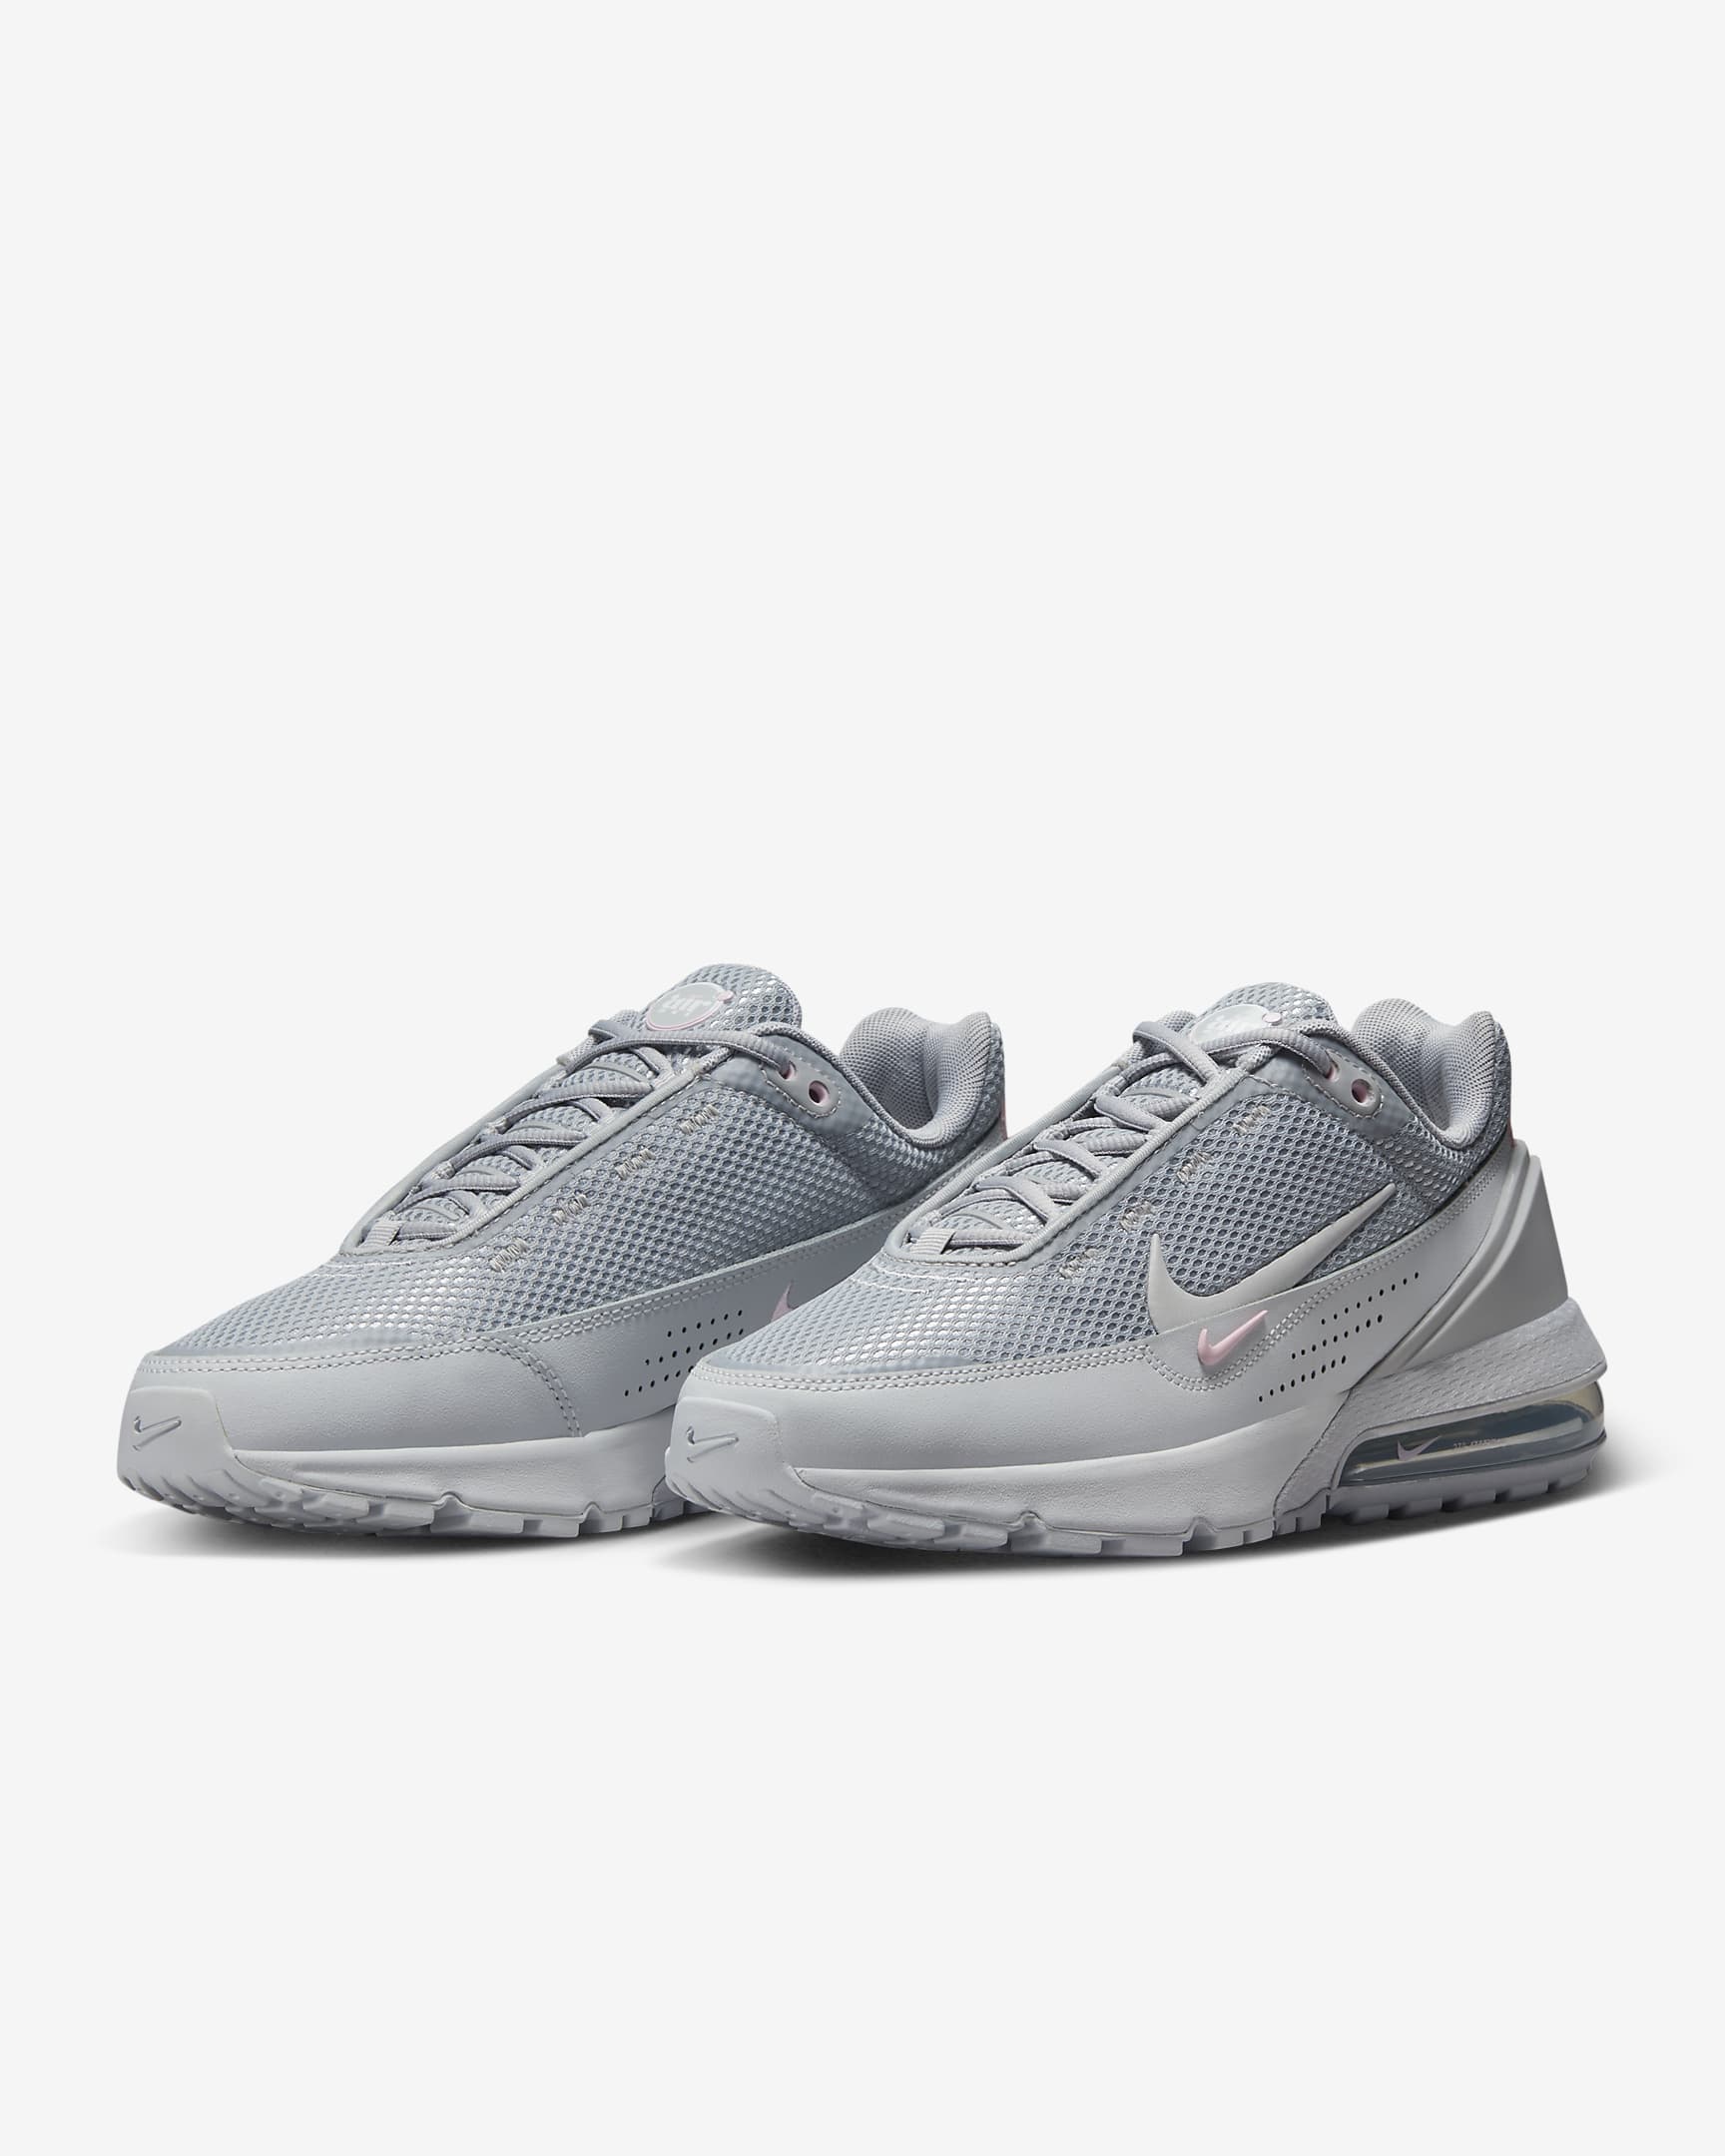 Nike Air Max Pulse Women's Shoes - Wolf Grey/Pure Platinum/White/Pink Foam